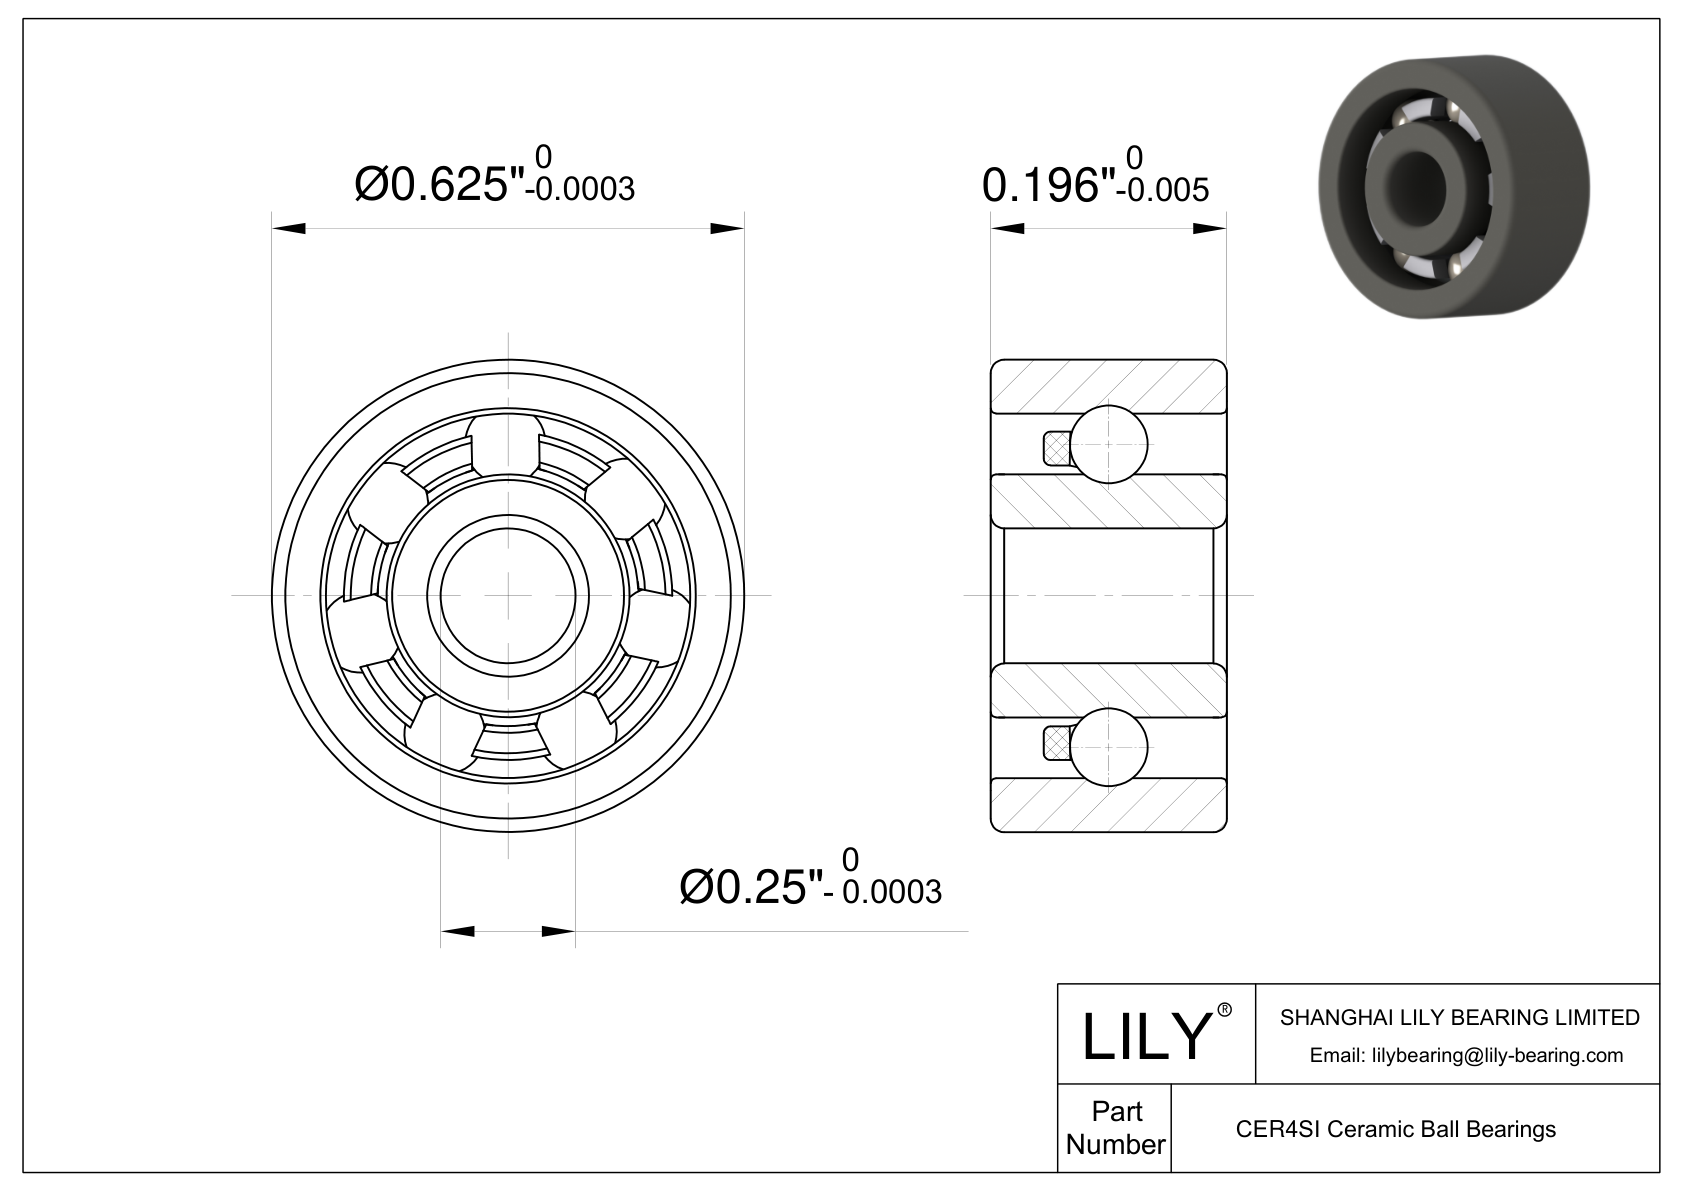 CESI R4 Inch Size Silicon Nitride Ceramic Bearings cad drawing